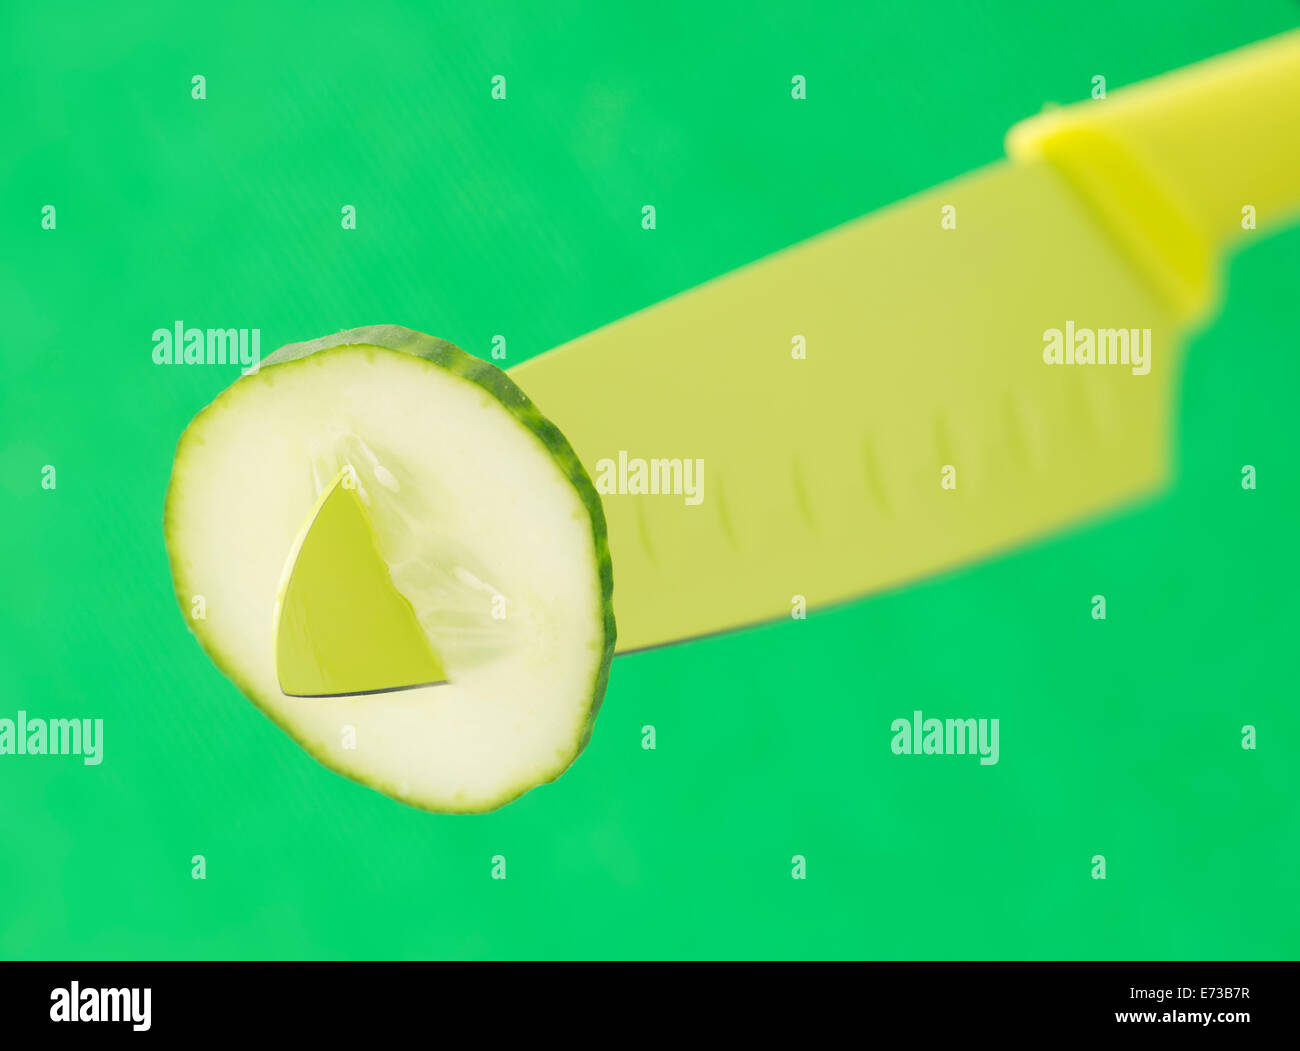 Cucumber slice and green knife Stock Photo